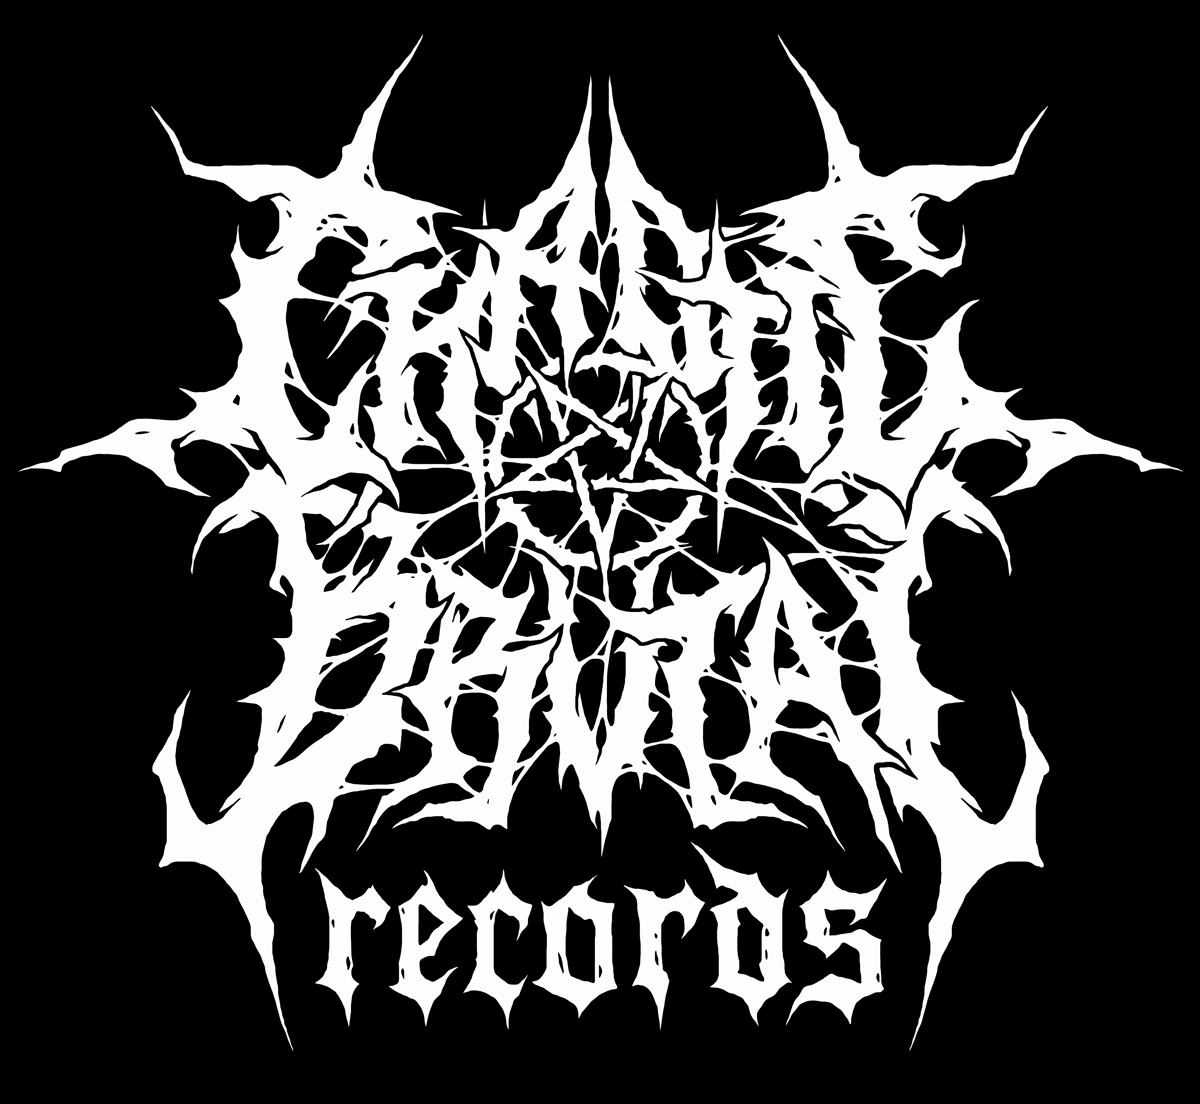 Chaotic Brutal Records